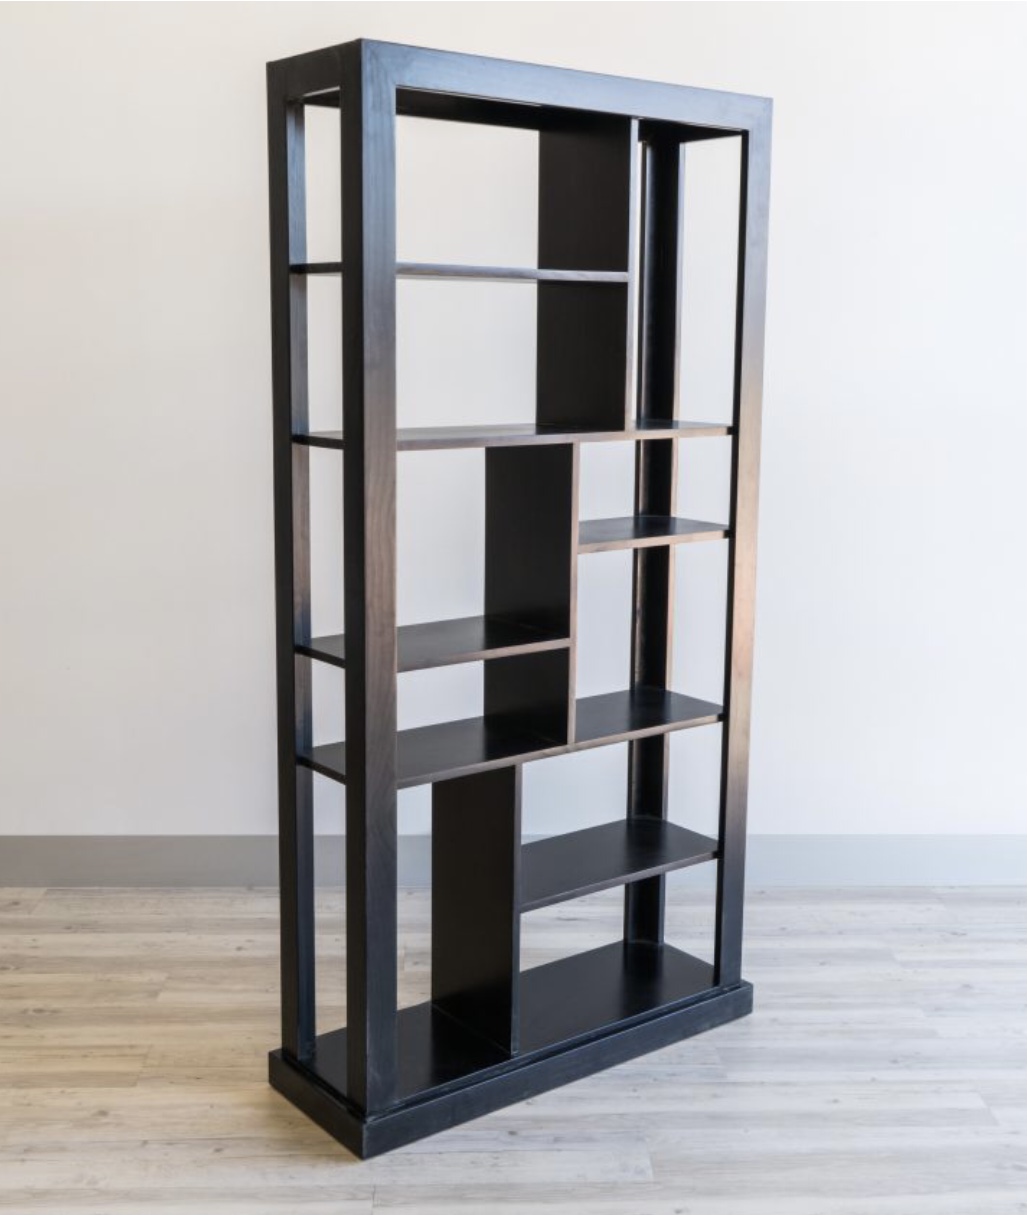 Open sided room divider